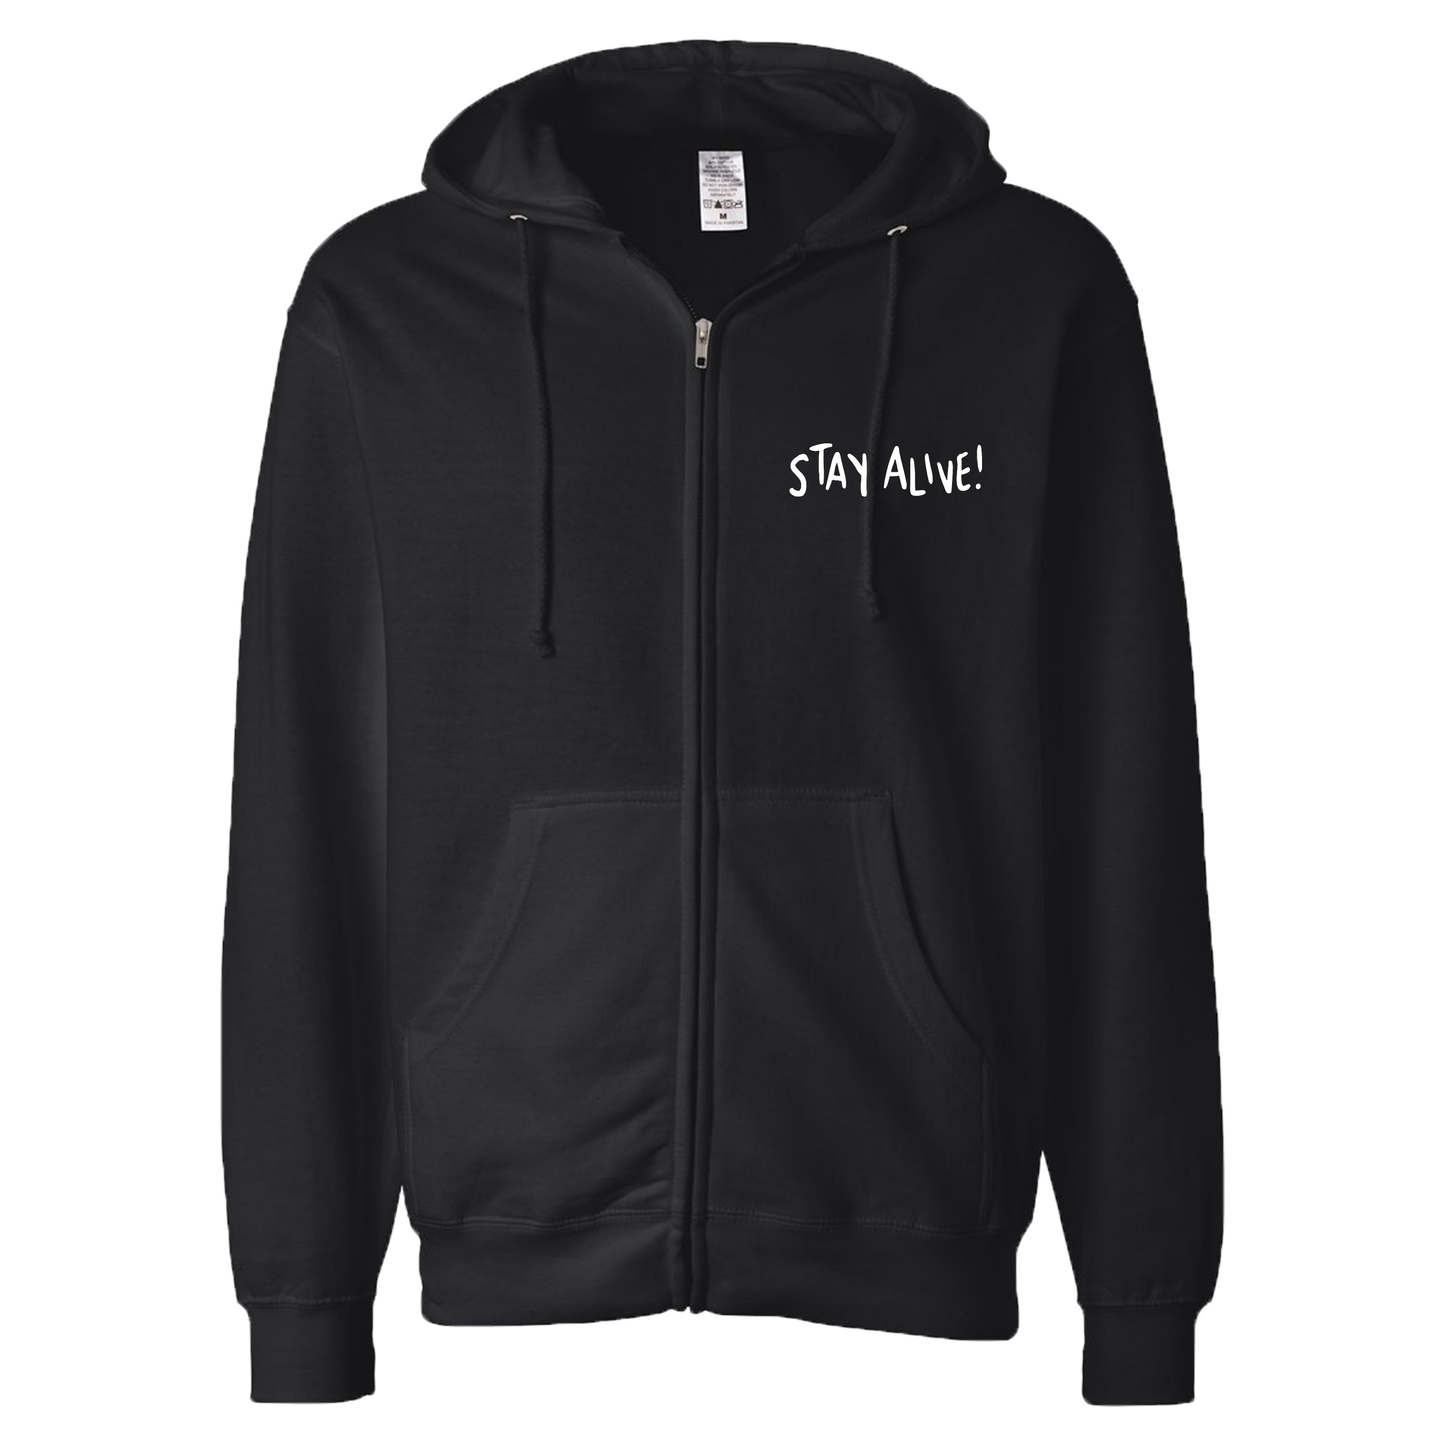 Stay Alive Church Zip-Up Hoodie